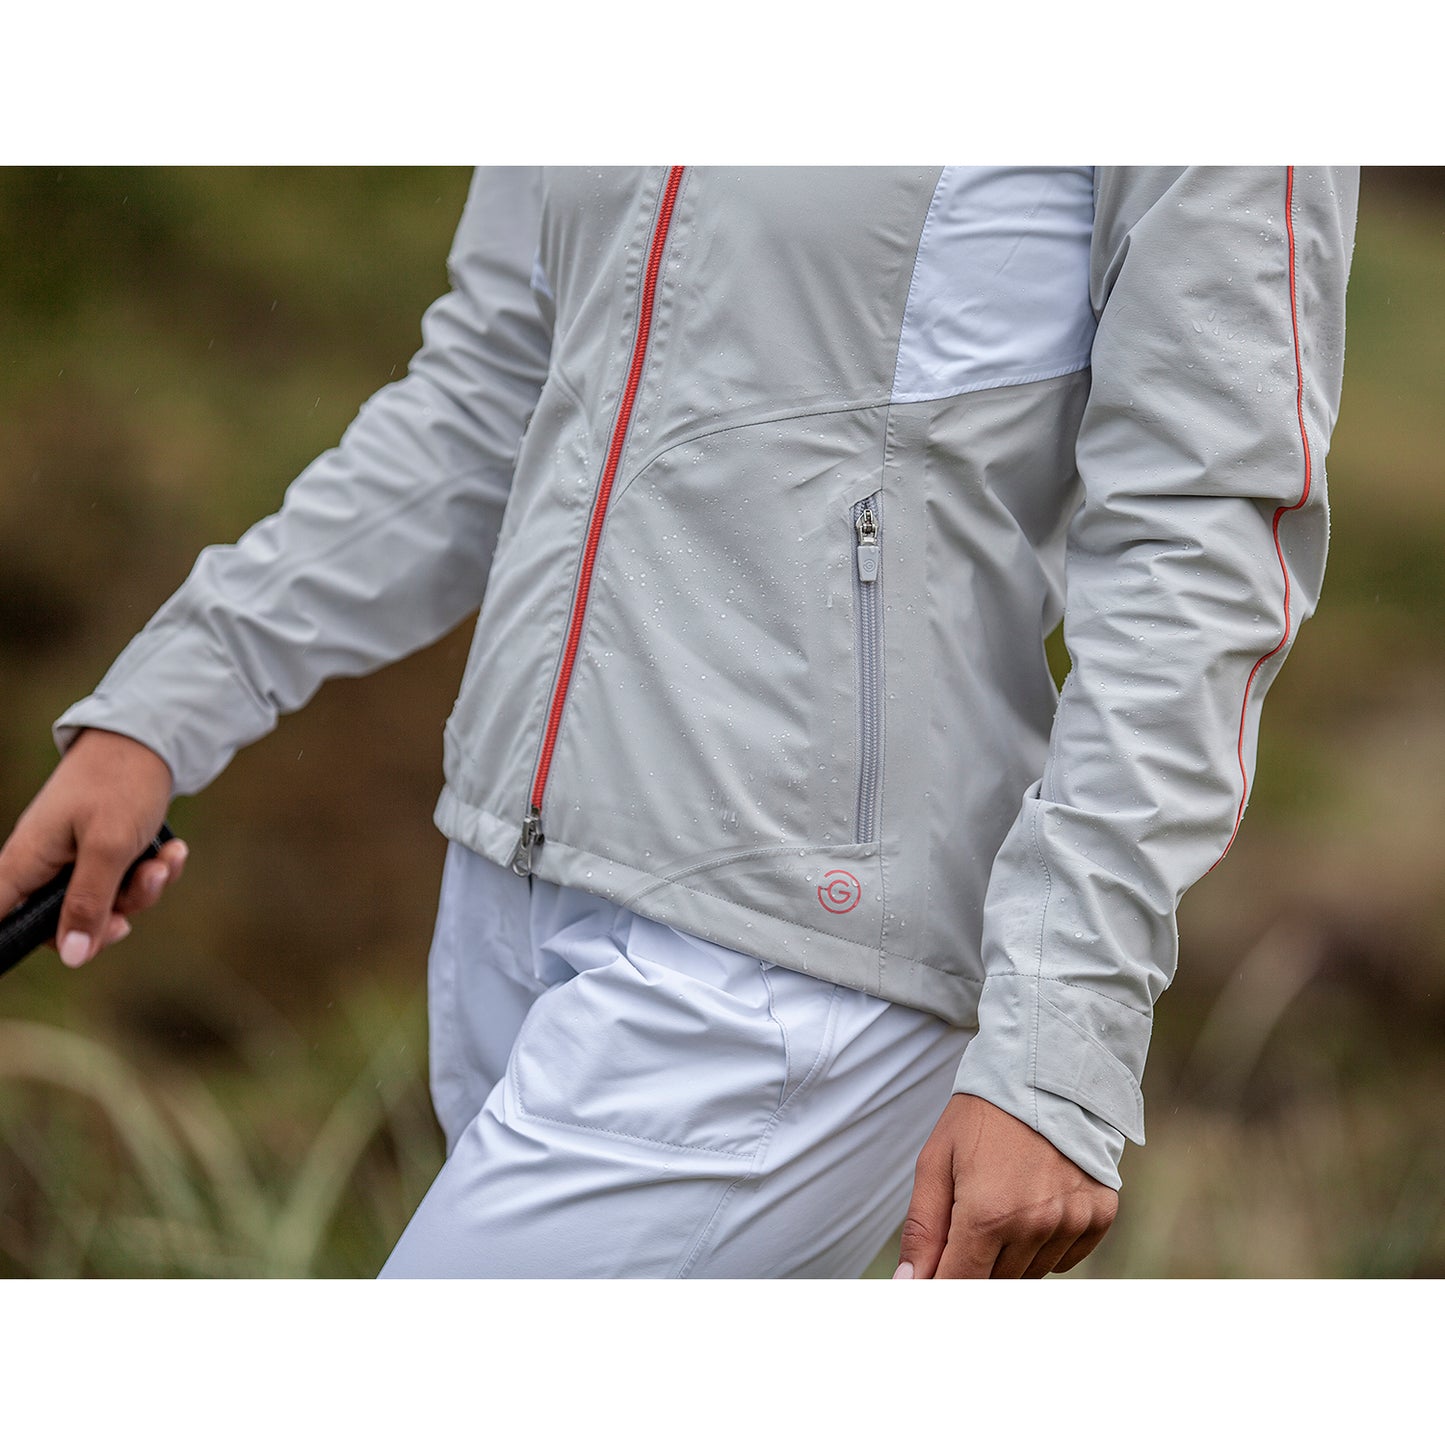 Galvin Green Ladies GORE-TEX Paclite Jacket with Contrast Panels in Cool Grey/White/Coral